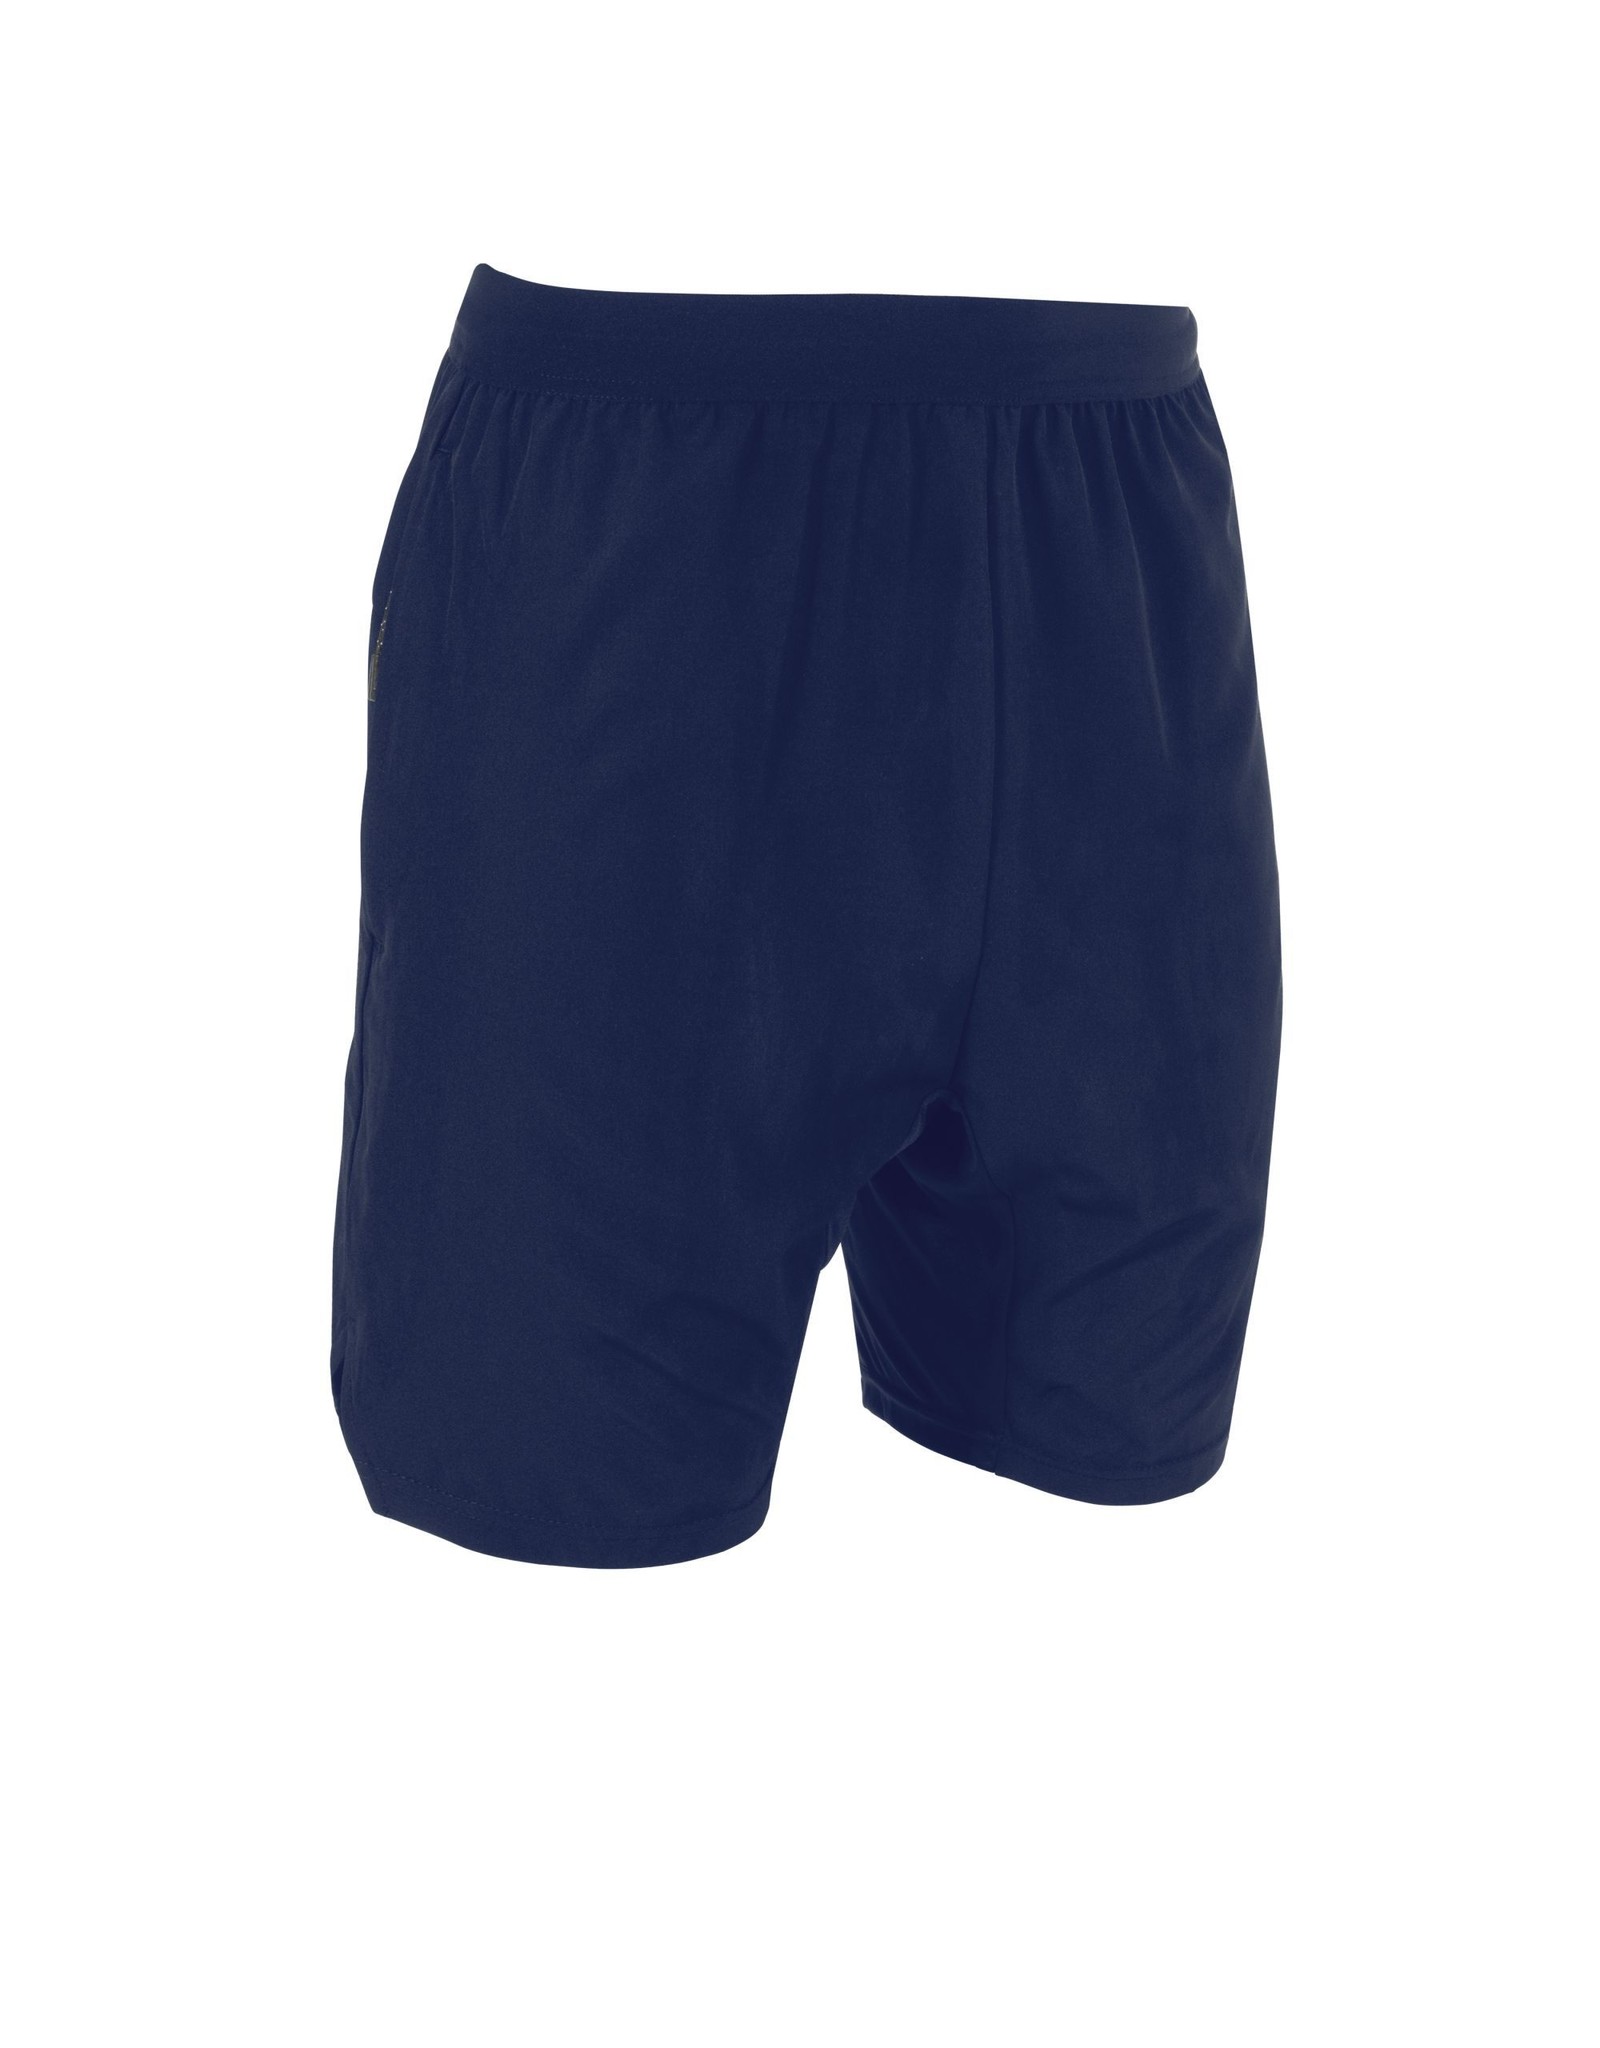 Stanno Functionals Woven Shorts II-Navy